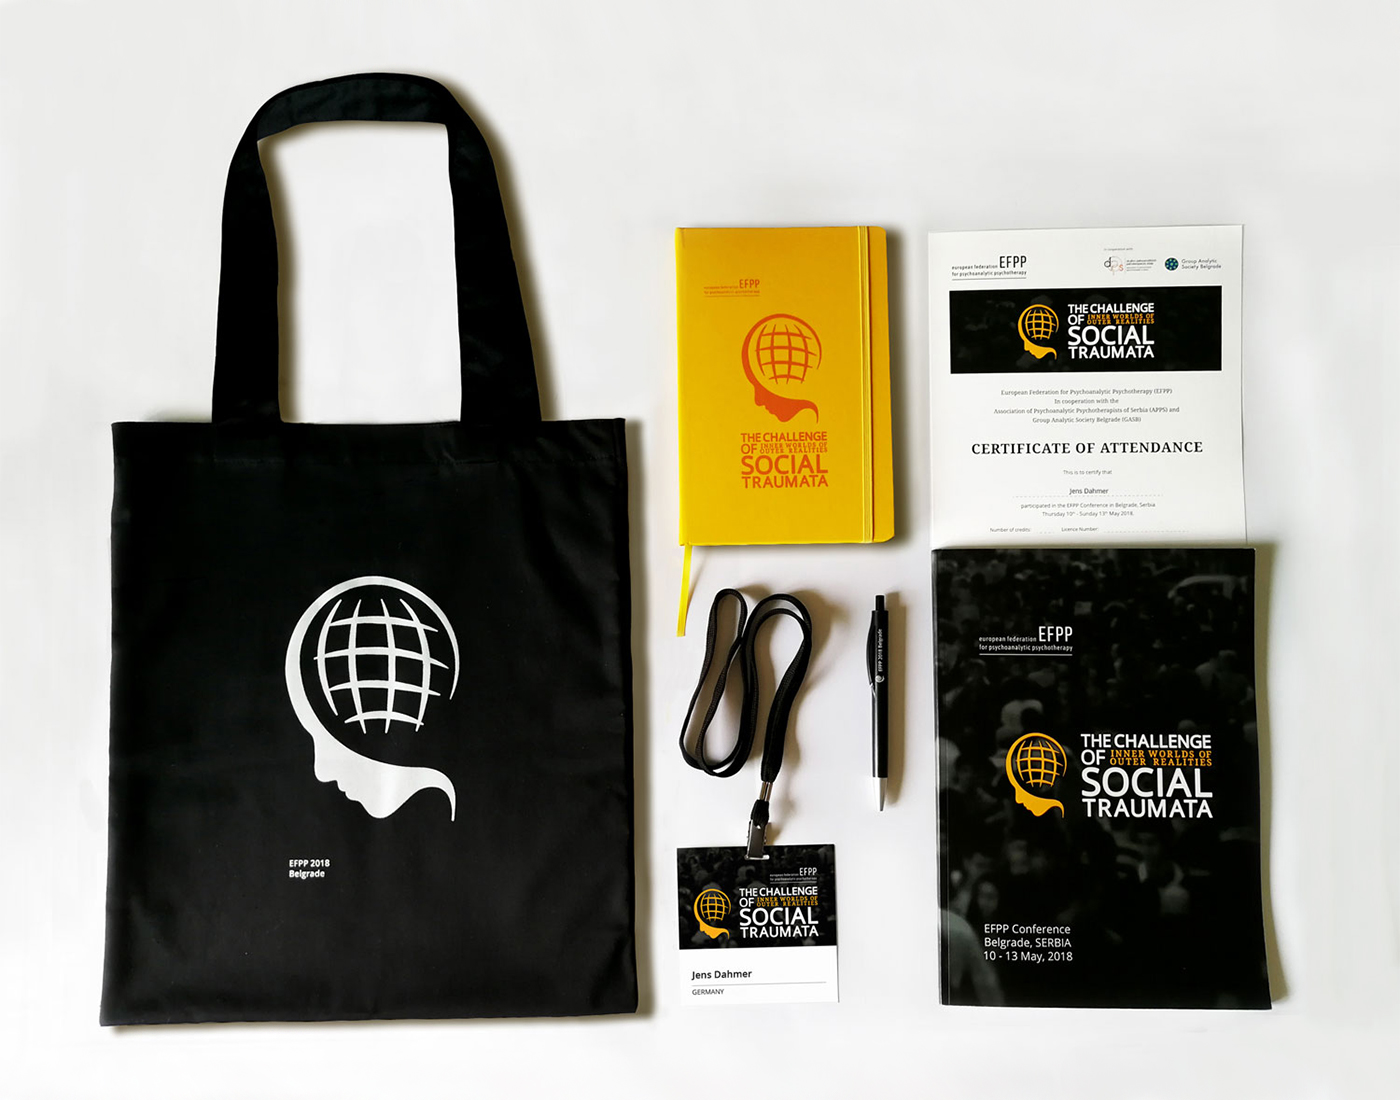 efpp conference in bekgrade branding - conference attendee merch